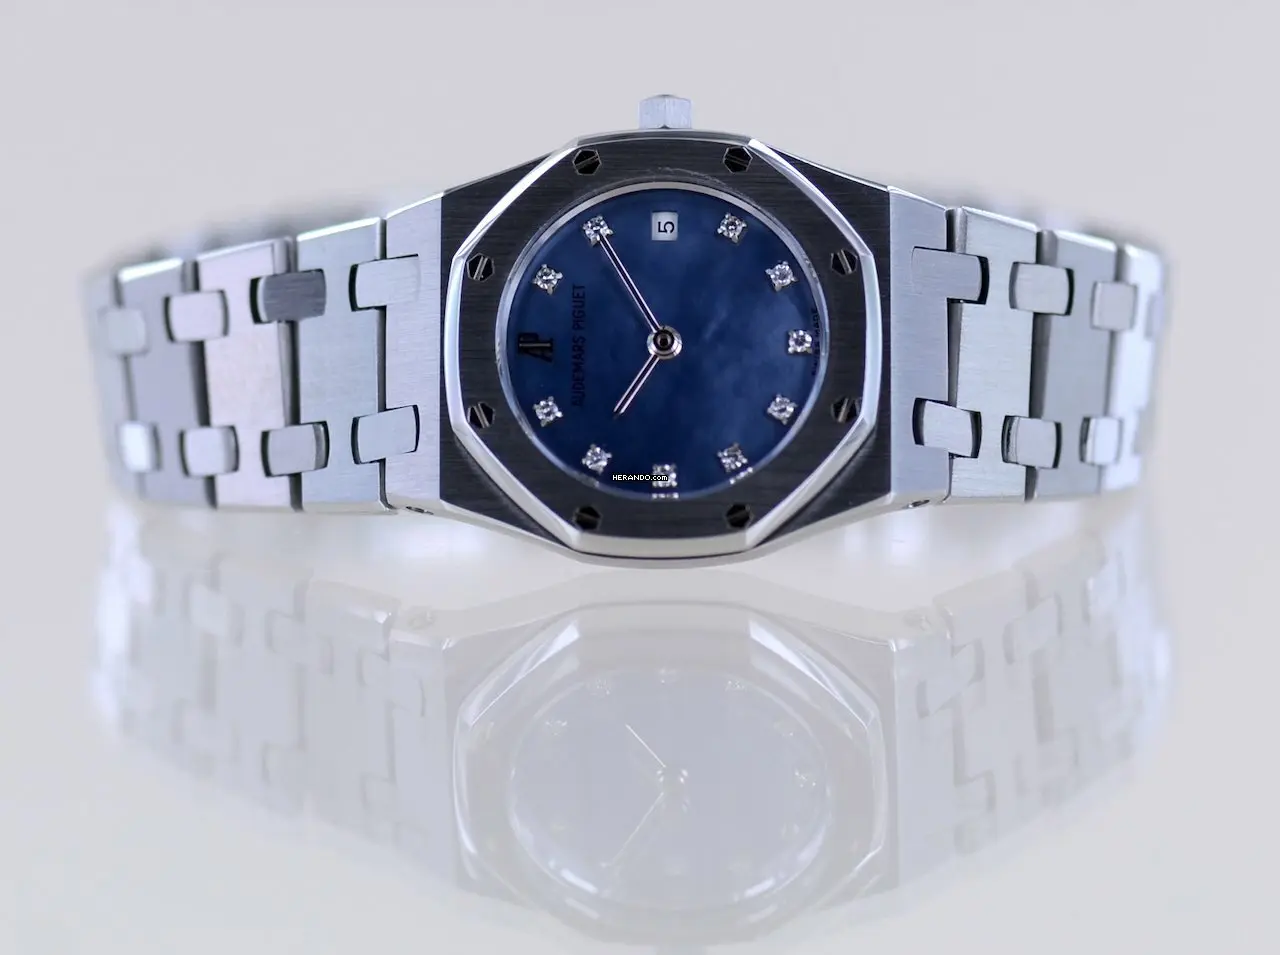 watches-330518-28654820-wiankm7sk0ntoald9vl6y91v-ExtraLarge.webp